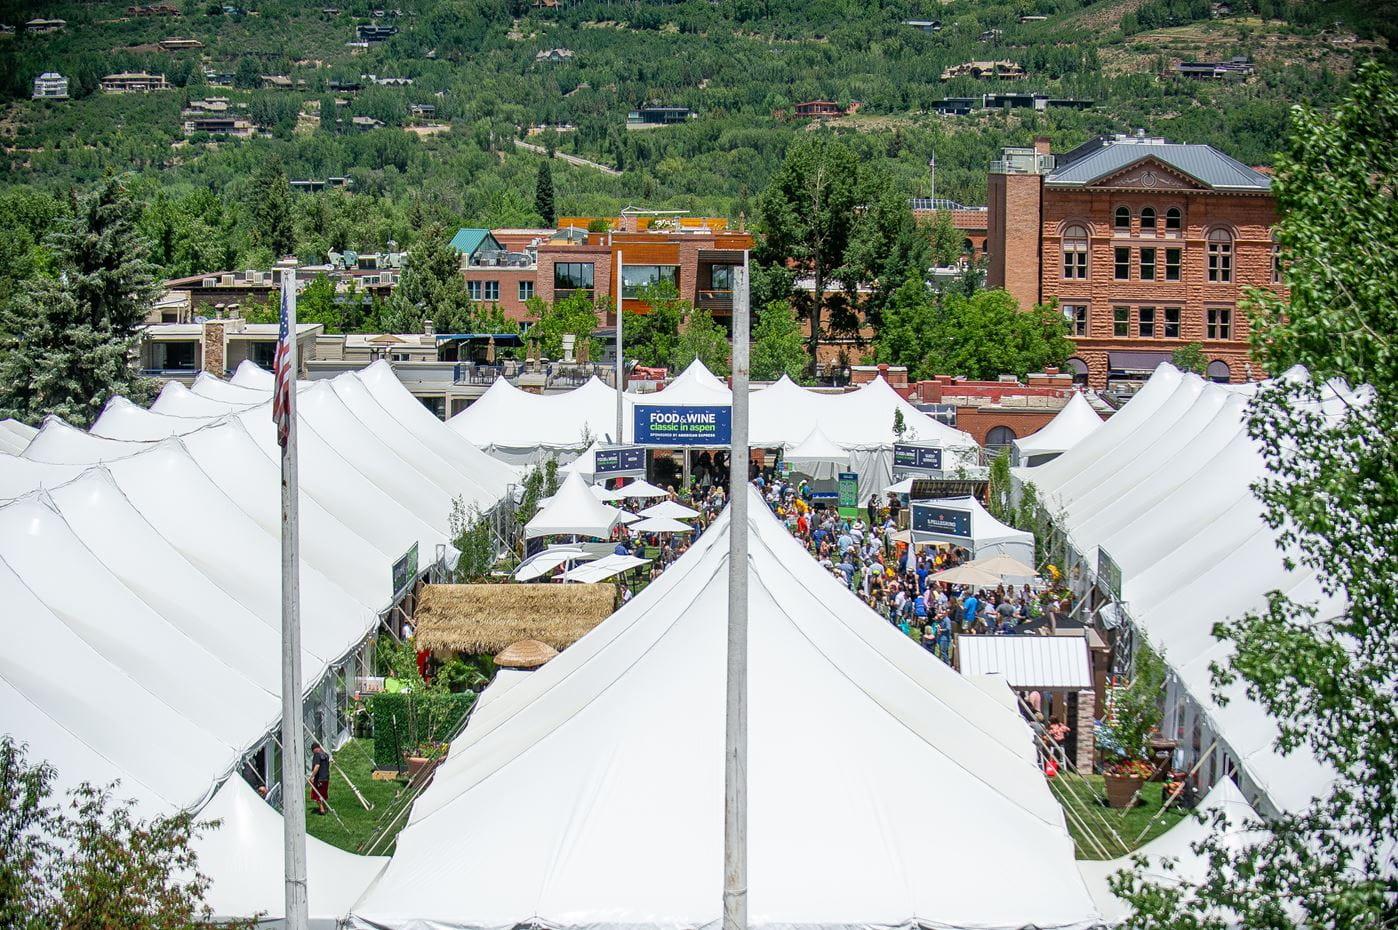 Insiders Guide to the Aspen Food & Wine Classic Aspen Snowmass